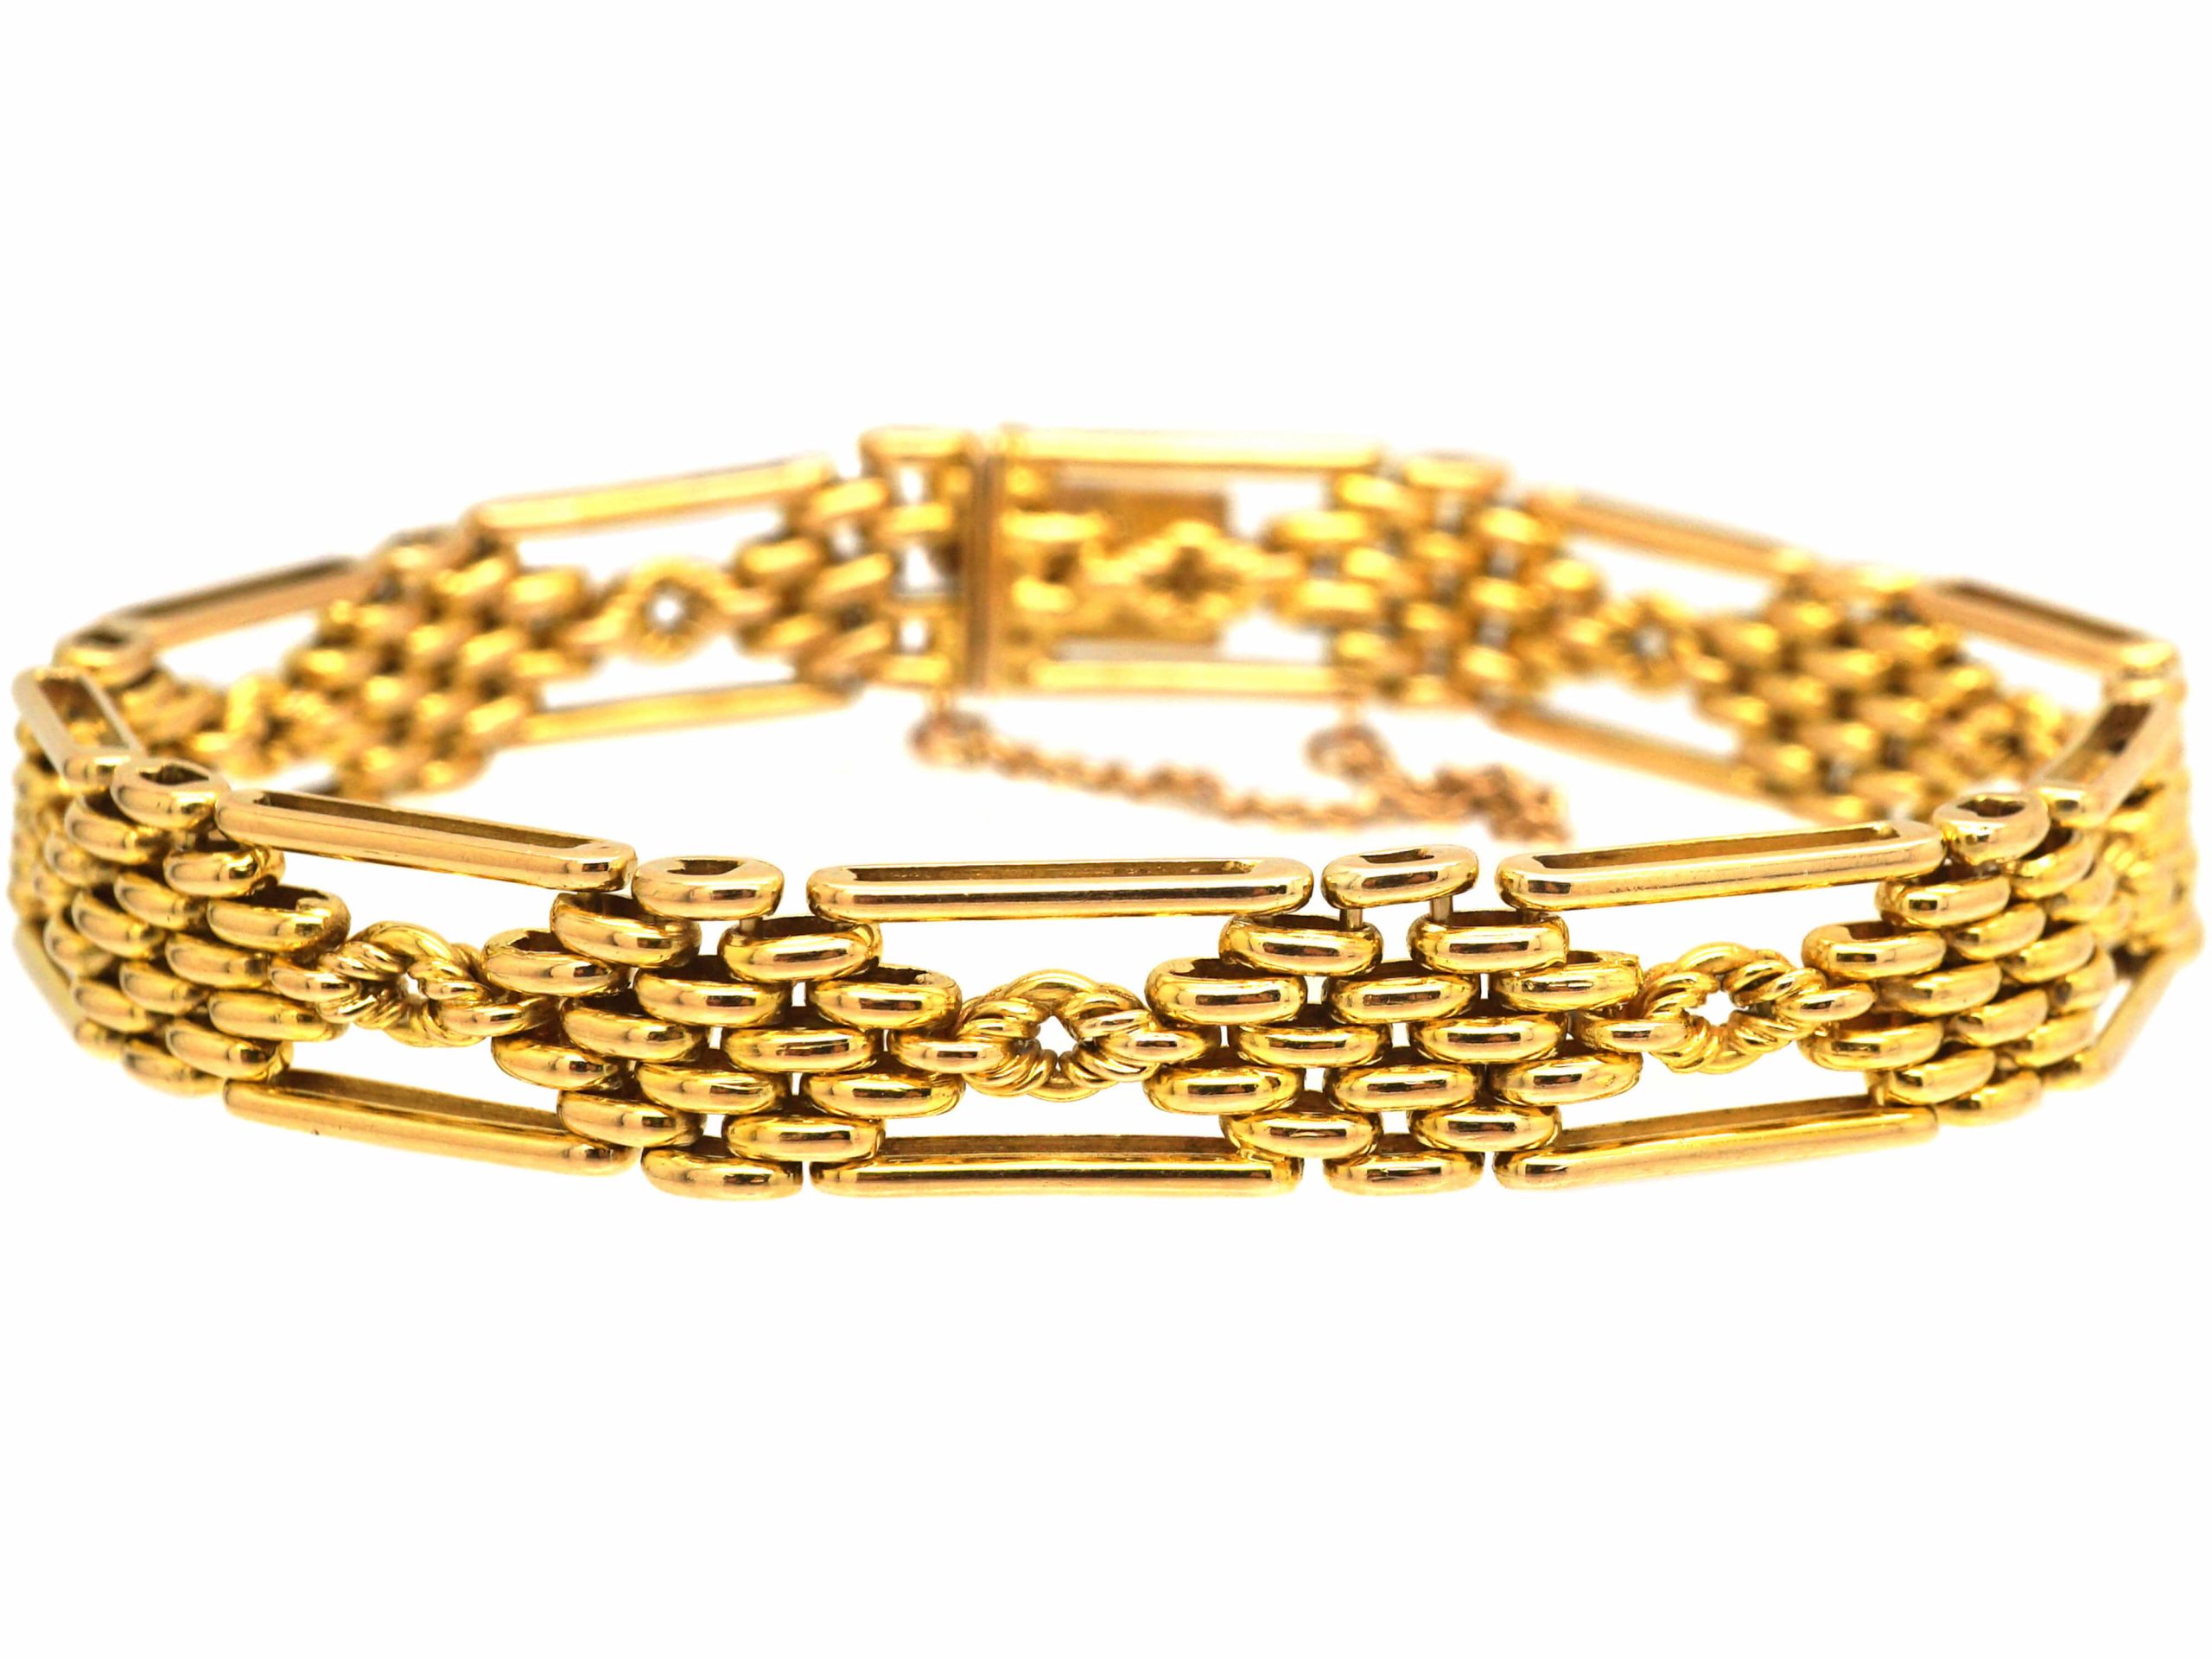 Edwardian 15ct Gold Gate Bracelet with Knot Detail (793T) | The Antique ...